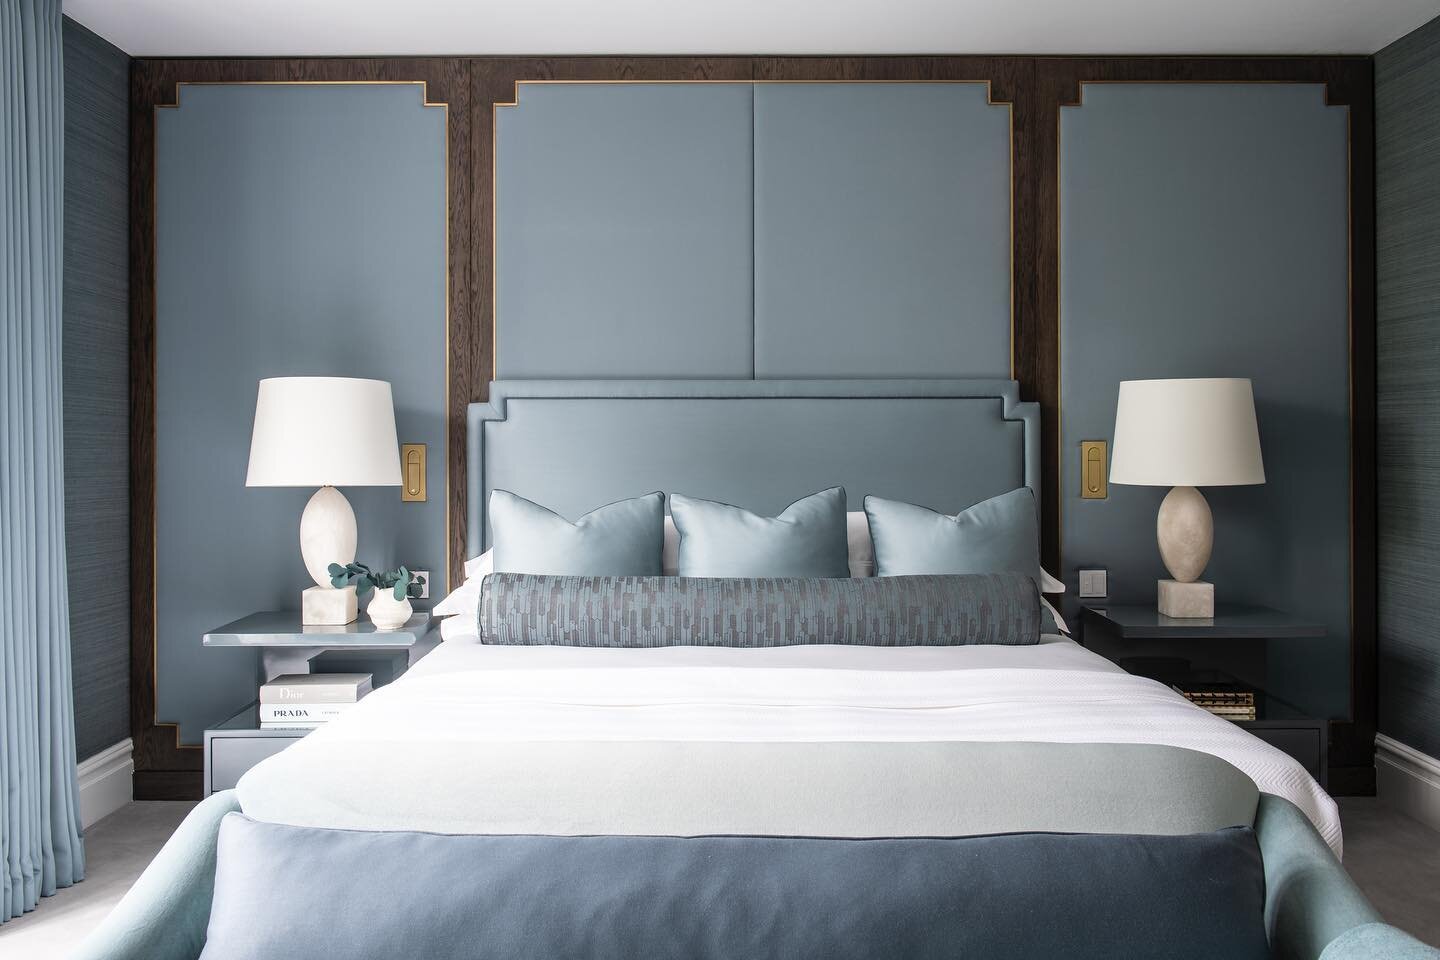 Tranquil mood vibes with these calming blue tones on repeat. 
Interiors @schillerbeynoninteriors Photography @jodystewartphotography Architecture @shapelondonarchitects  #interiordesign #masterbedroom #luxury #luxurylifestyle #upholstery #bedroom #be